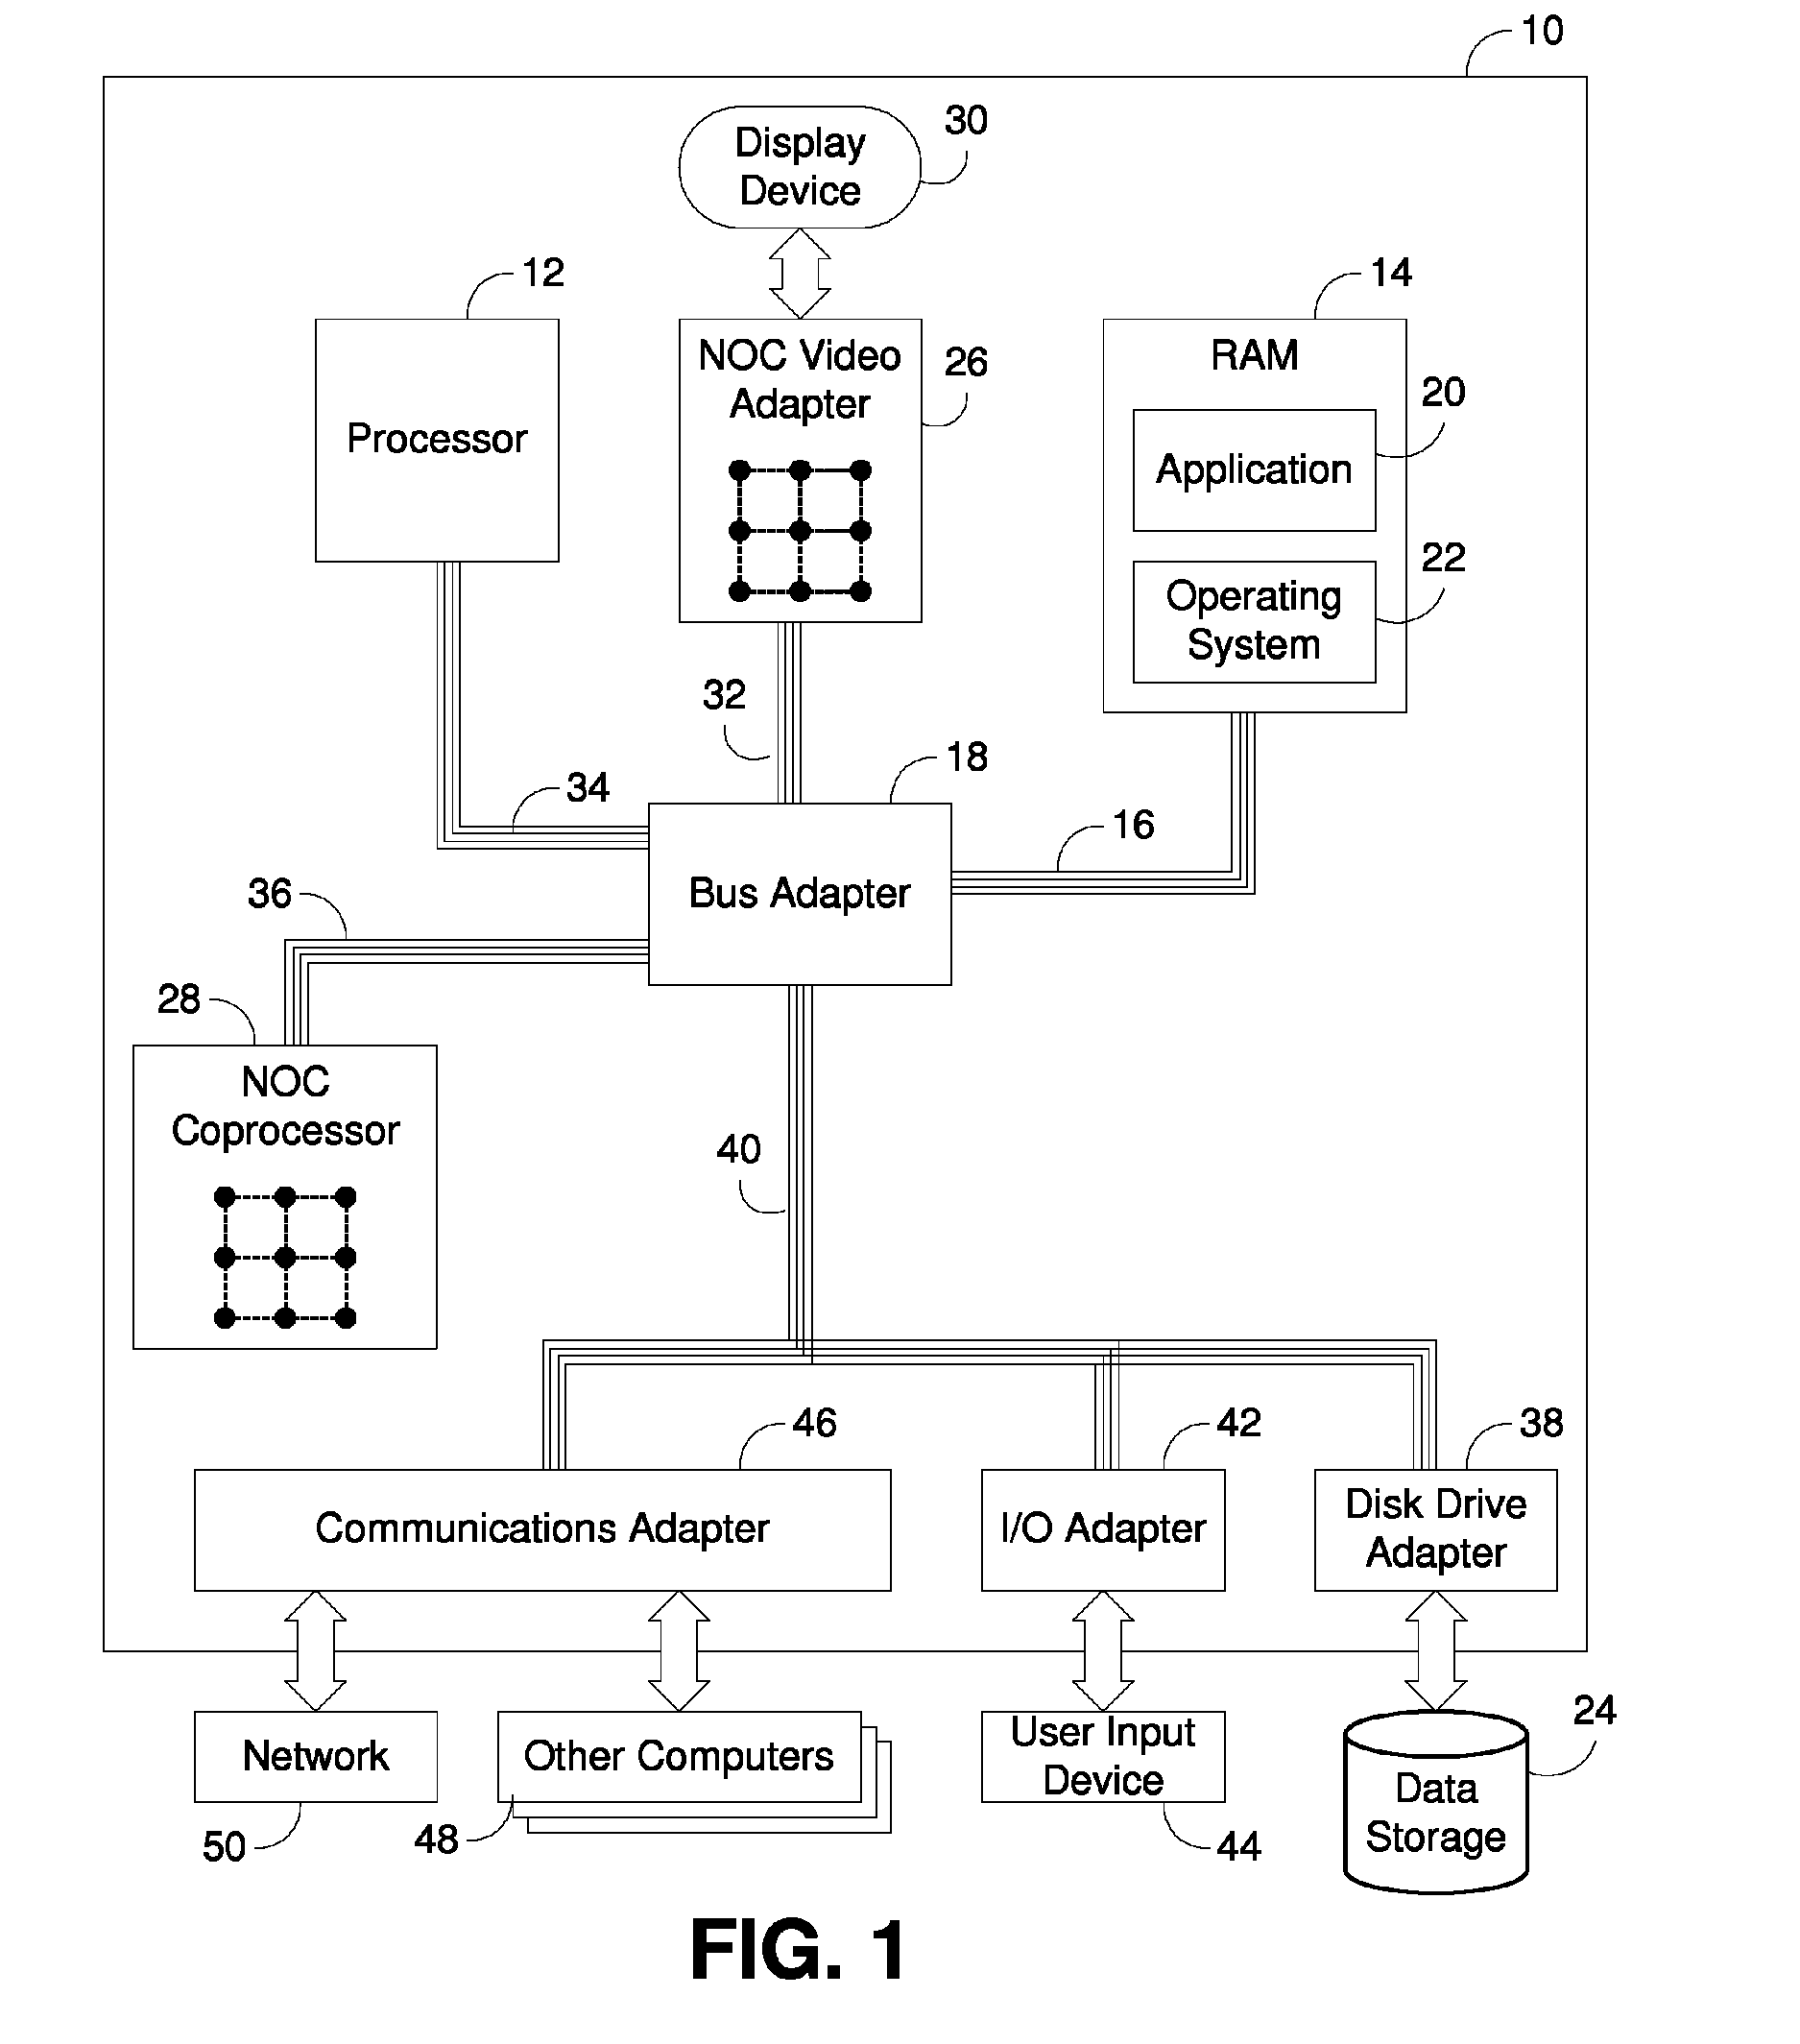 Processing unit incorporating special purpose register for use with instruction-based persistent vector multiplexer control